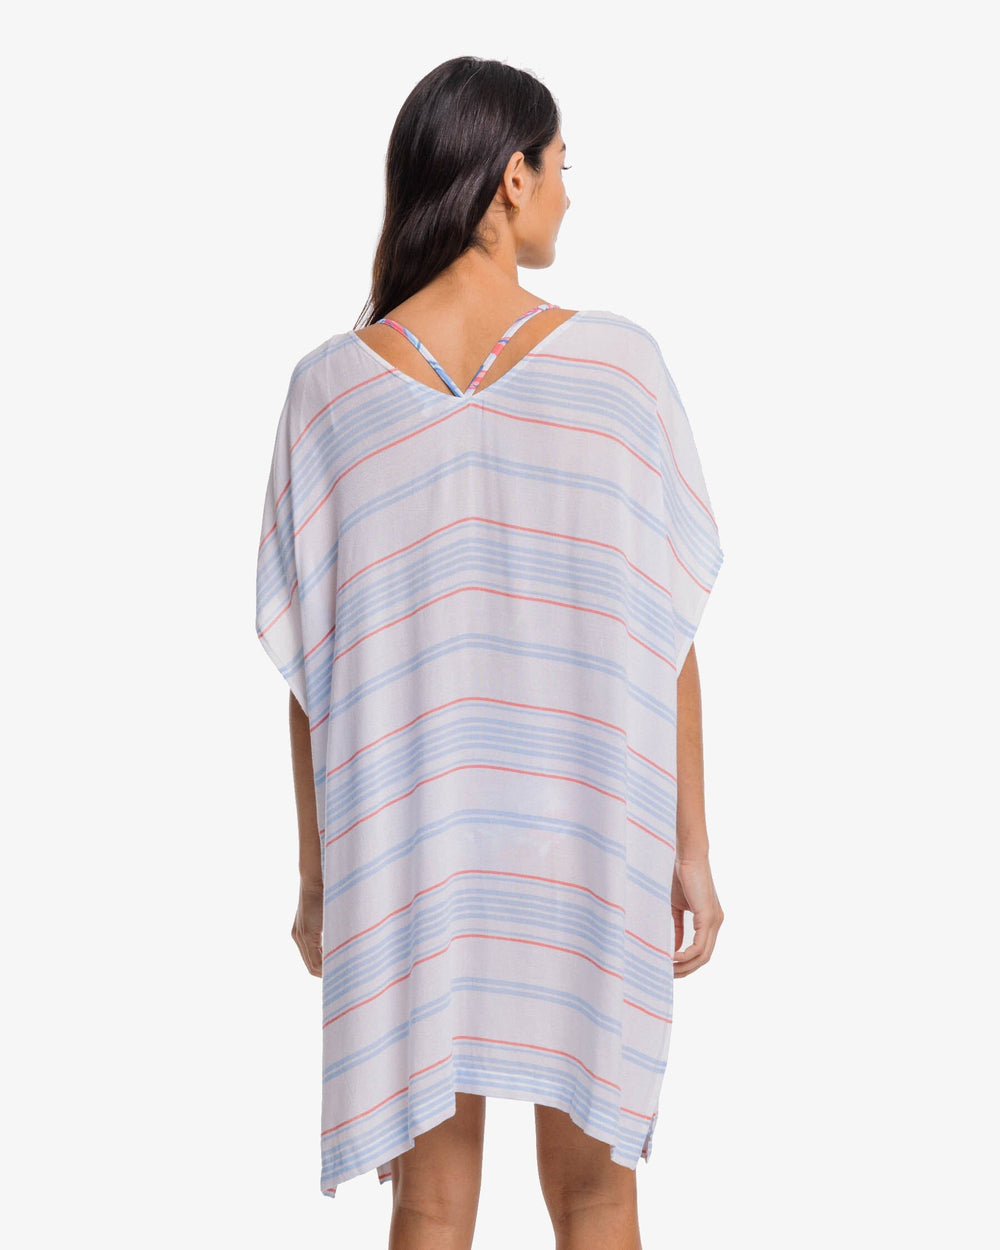 The back view of the Southern Tide Kamilia Beach Bliss Stripe Caftan by Southern Tide - Sky Blue